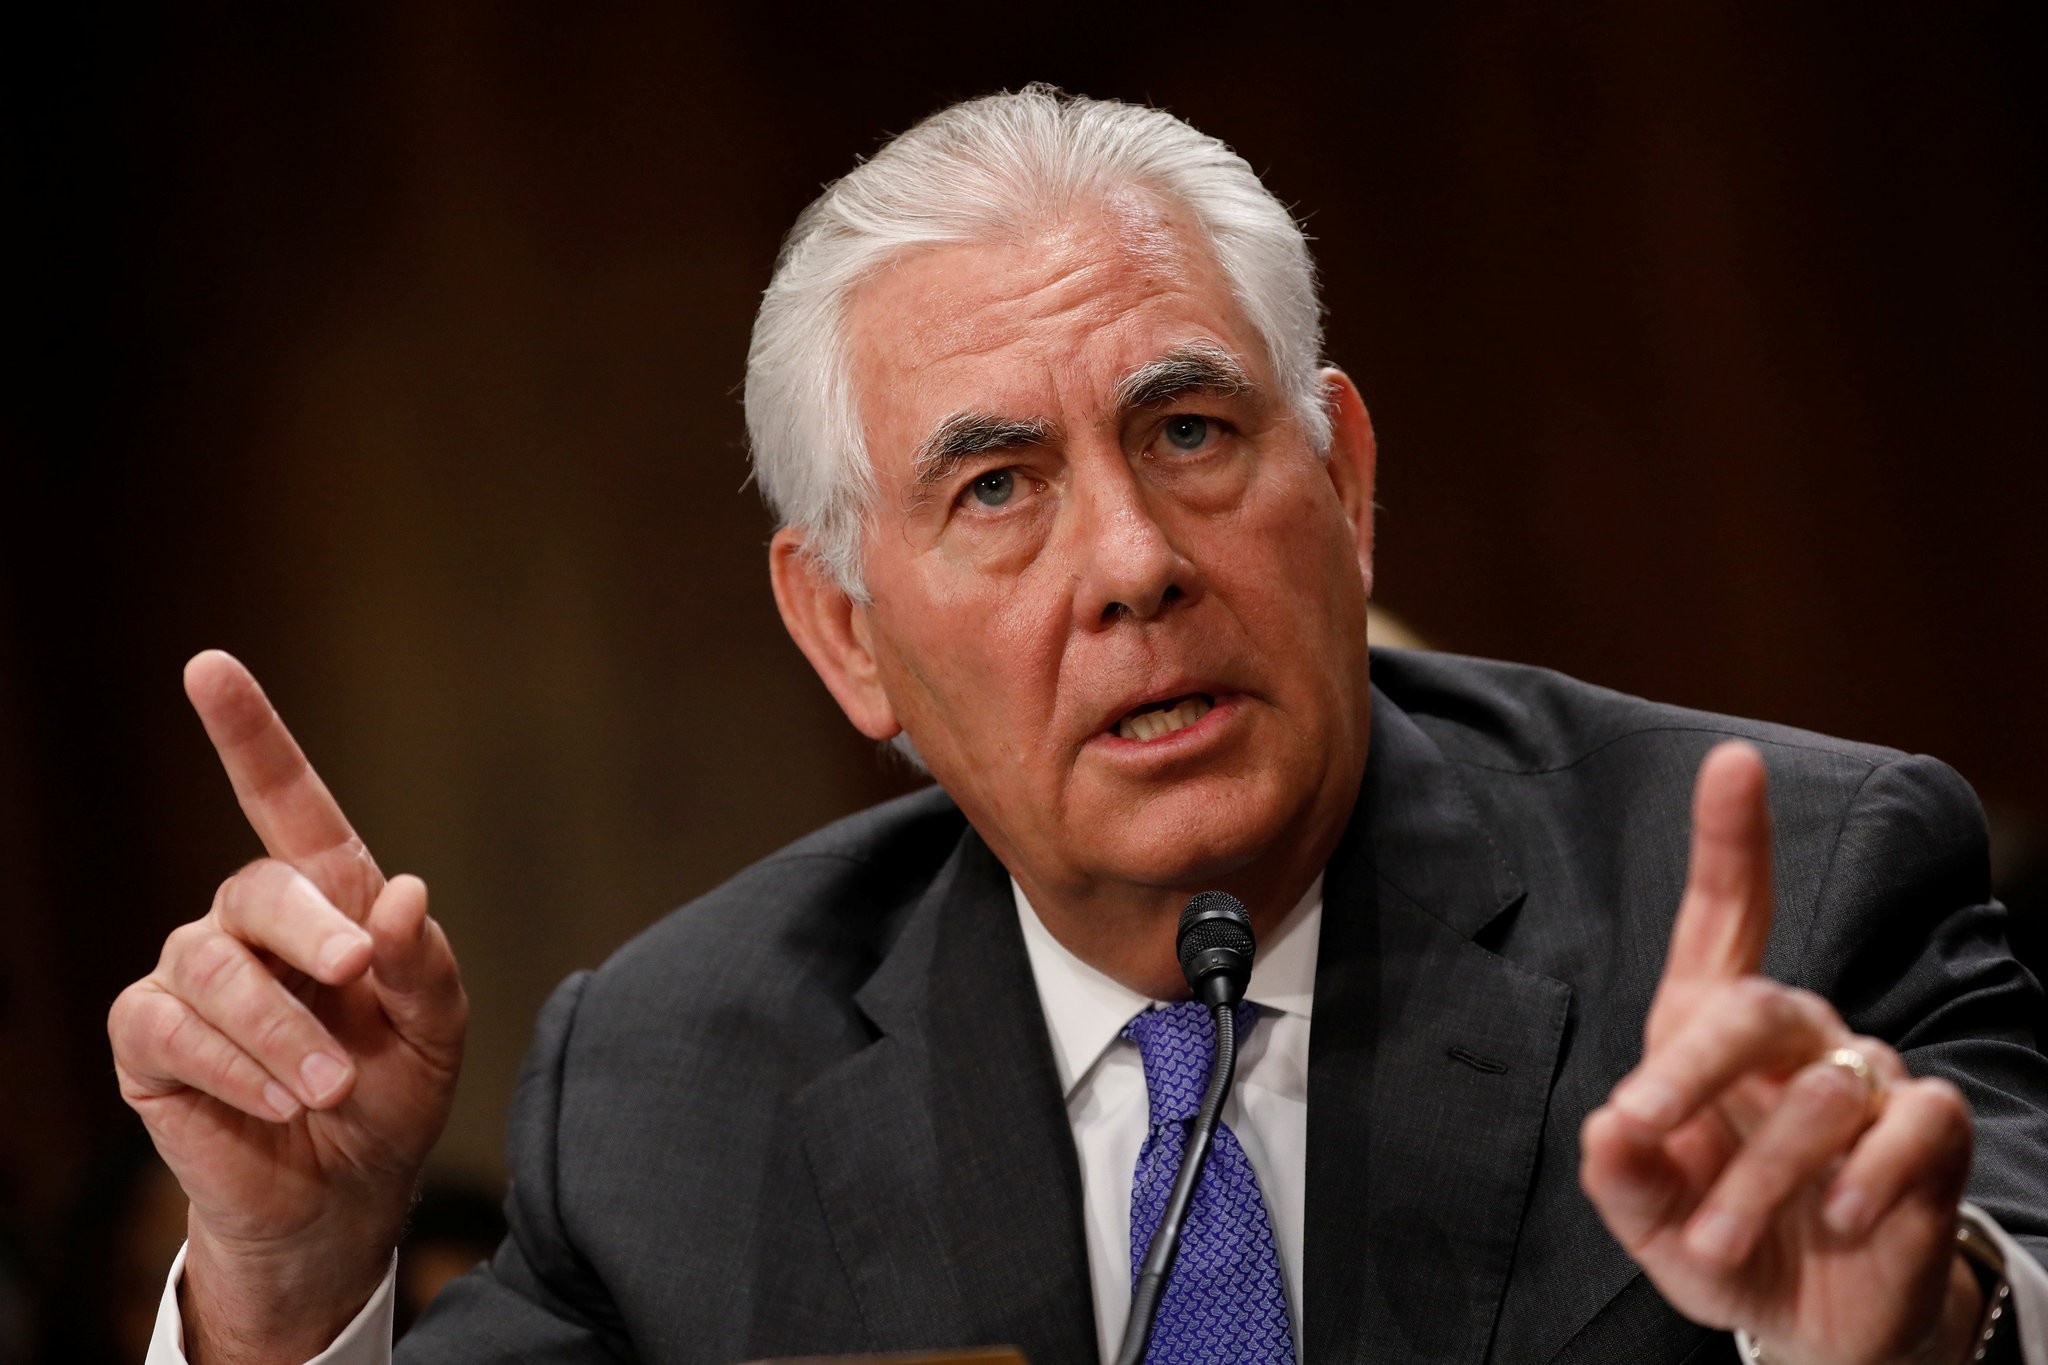 Rex Tillerson said that the U.S. administration was worried about Ankara's rapprochement with Moscow, in the Senate Foreign Relations Committee on Capitol Hill in Washington, D.C, June 14.